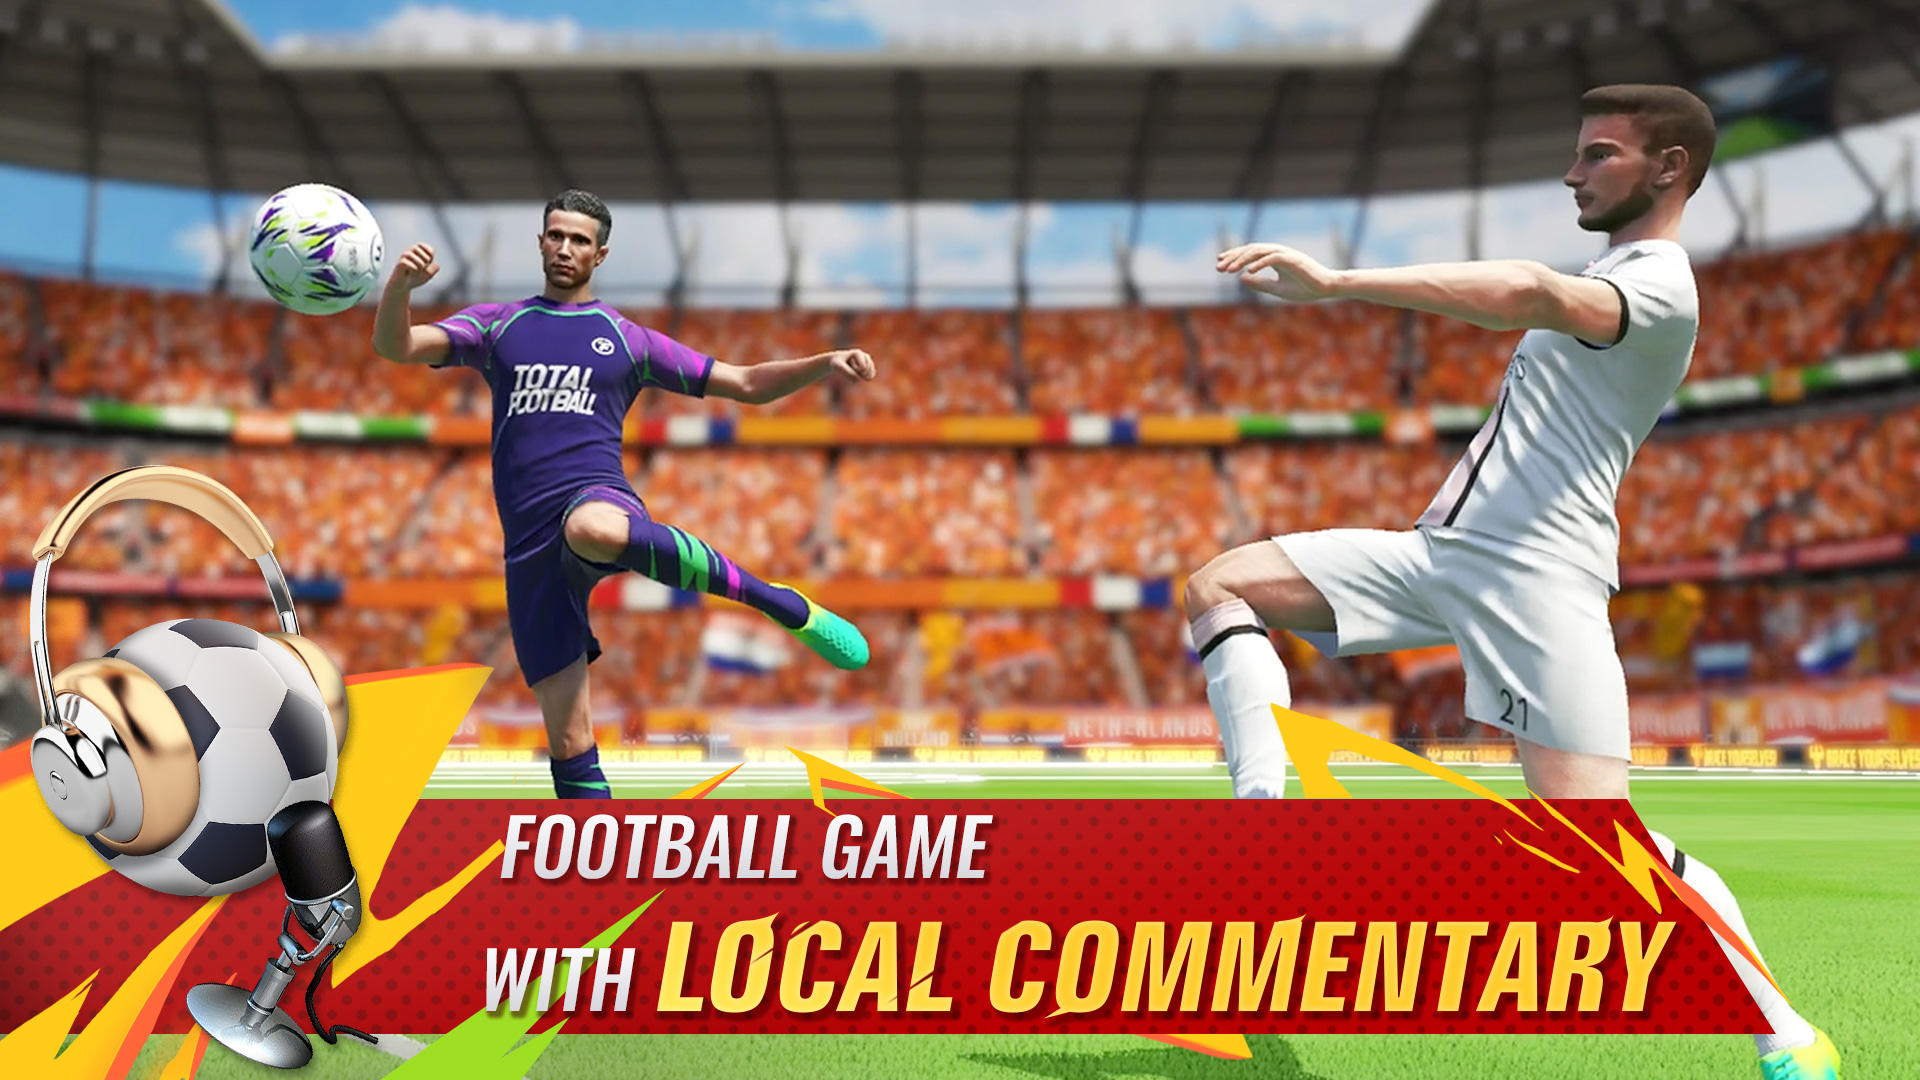 WORLD CUP SPECIAL - TOP 5 Best Football Games For Android & iOS 2022 